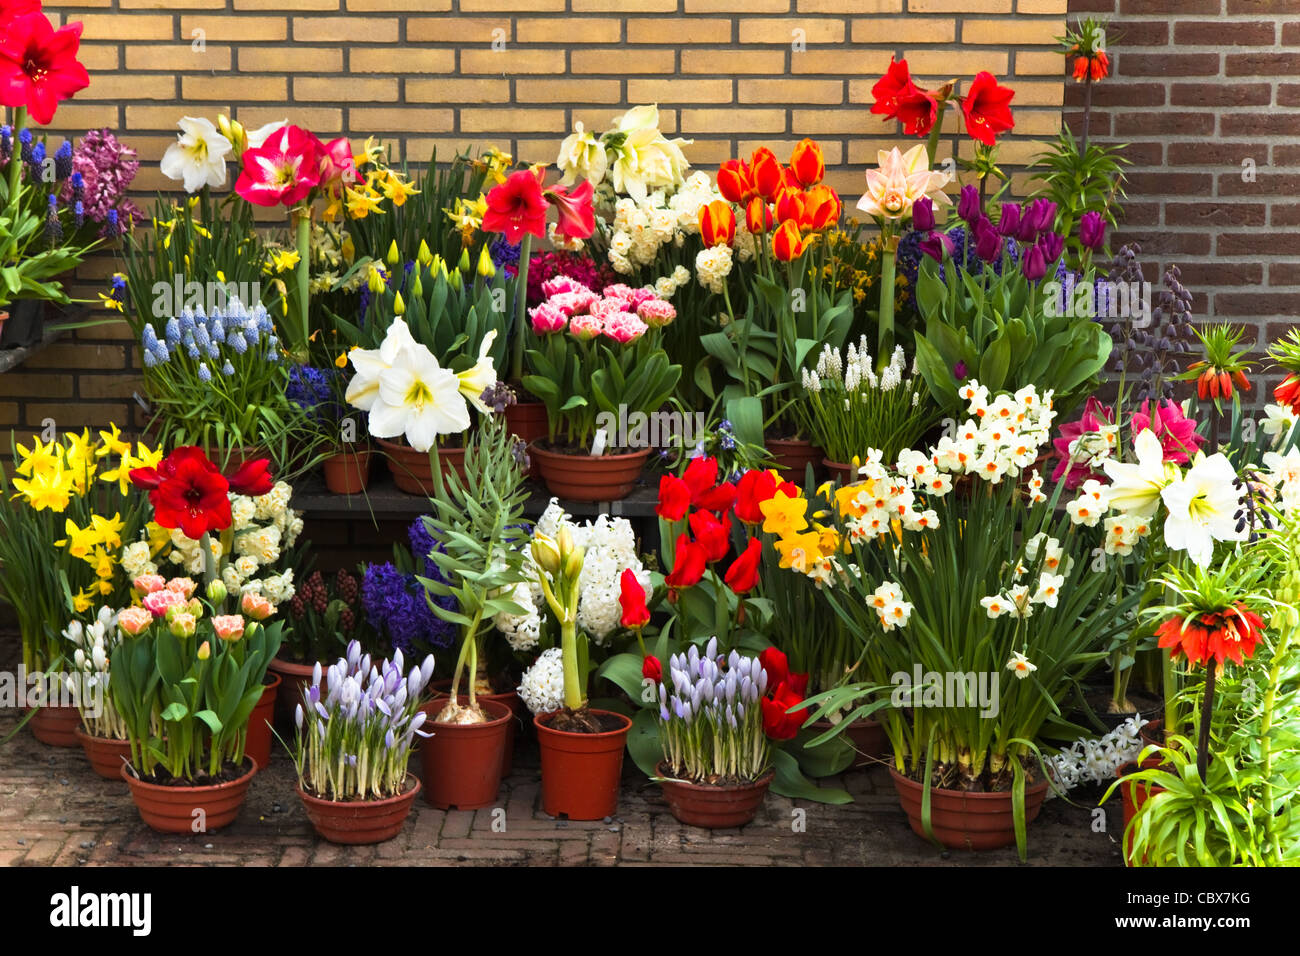 Wall with collection of colorful spring flowers in pots and containers Stock Photo